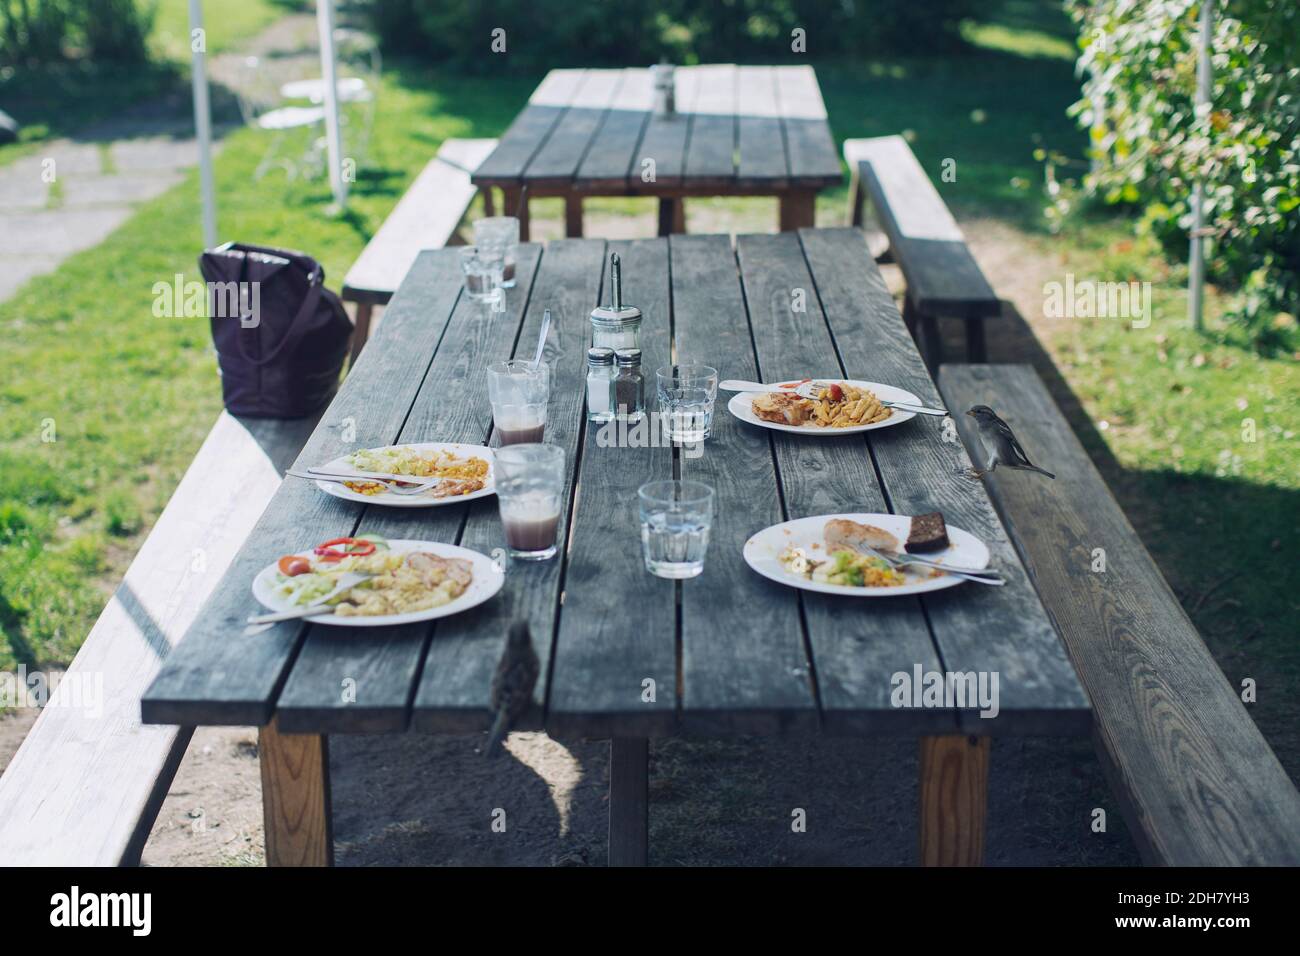 Food served on table at outdoor restaurant Stock Photo